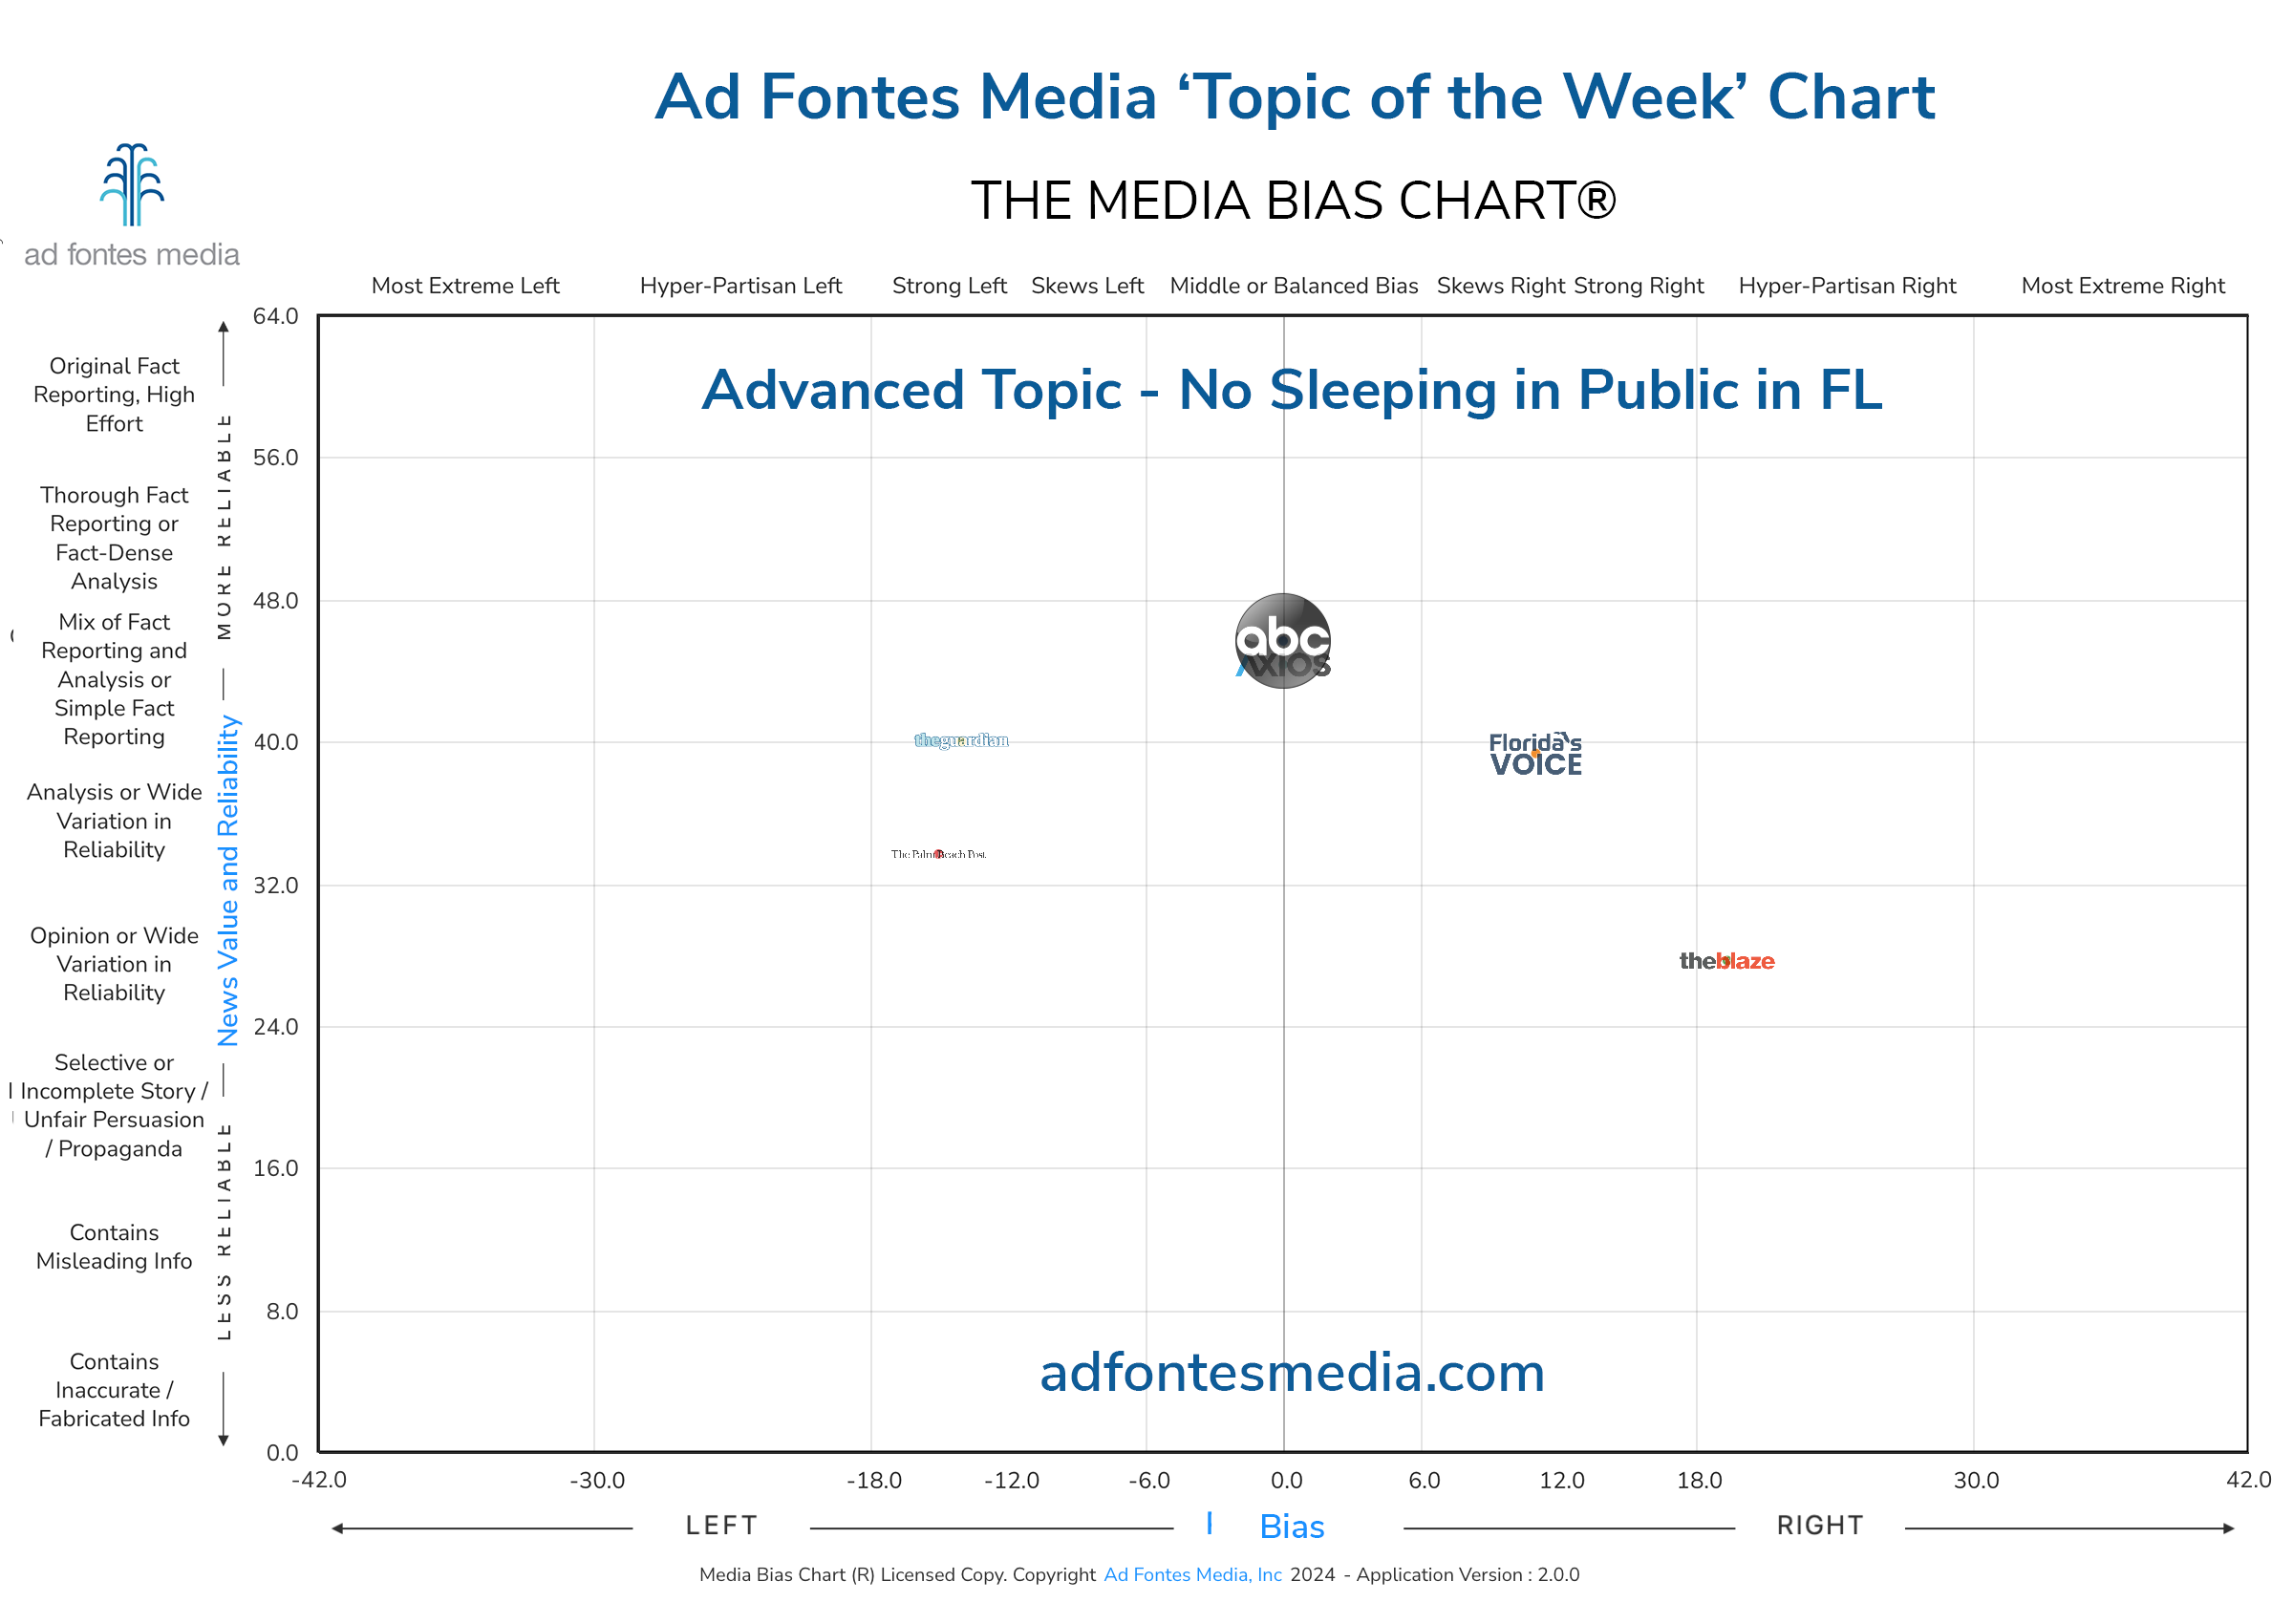 Media Bias Chart takes a look at bill that prohibits cities and counties from allowing people to sleep in public places in Florida